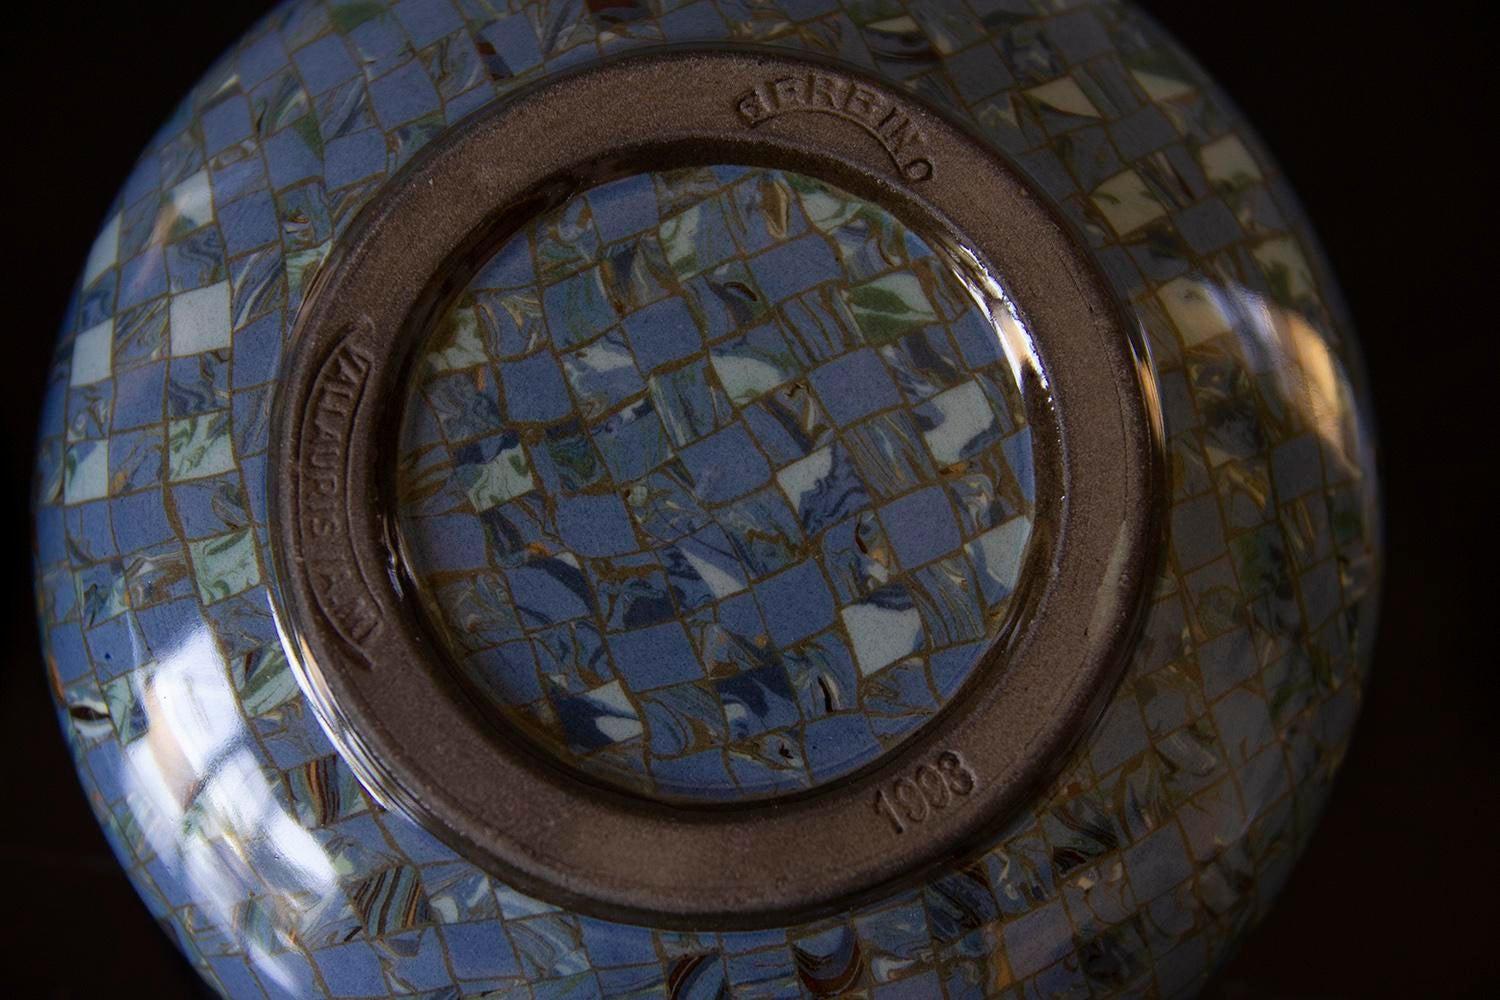 Jean Gerbino (1876-1966) Vallauris France - ceramic with stunning mosaic glaze - European Vintage. It can be just a decorative element to your living space or use it to hold your jewelry, keys, anything you want.